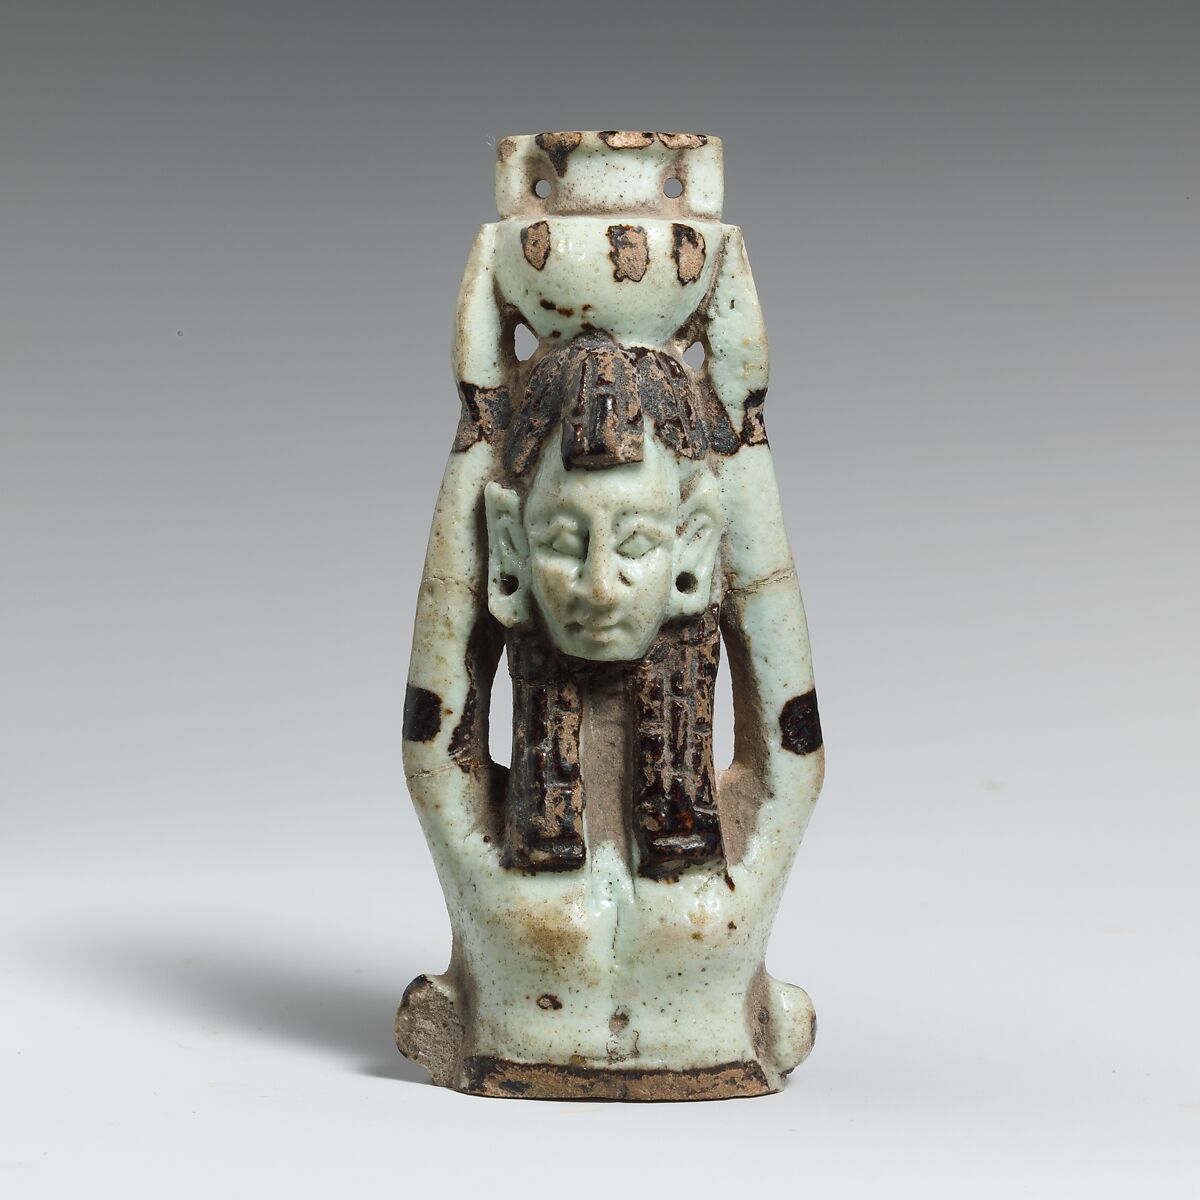 Fragment of a faience statuette of a woman holding a vase on her head, Faience, East Greek 